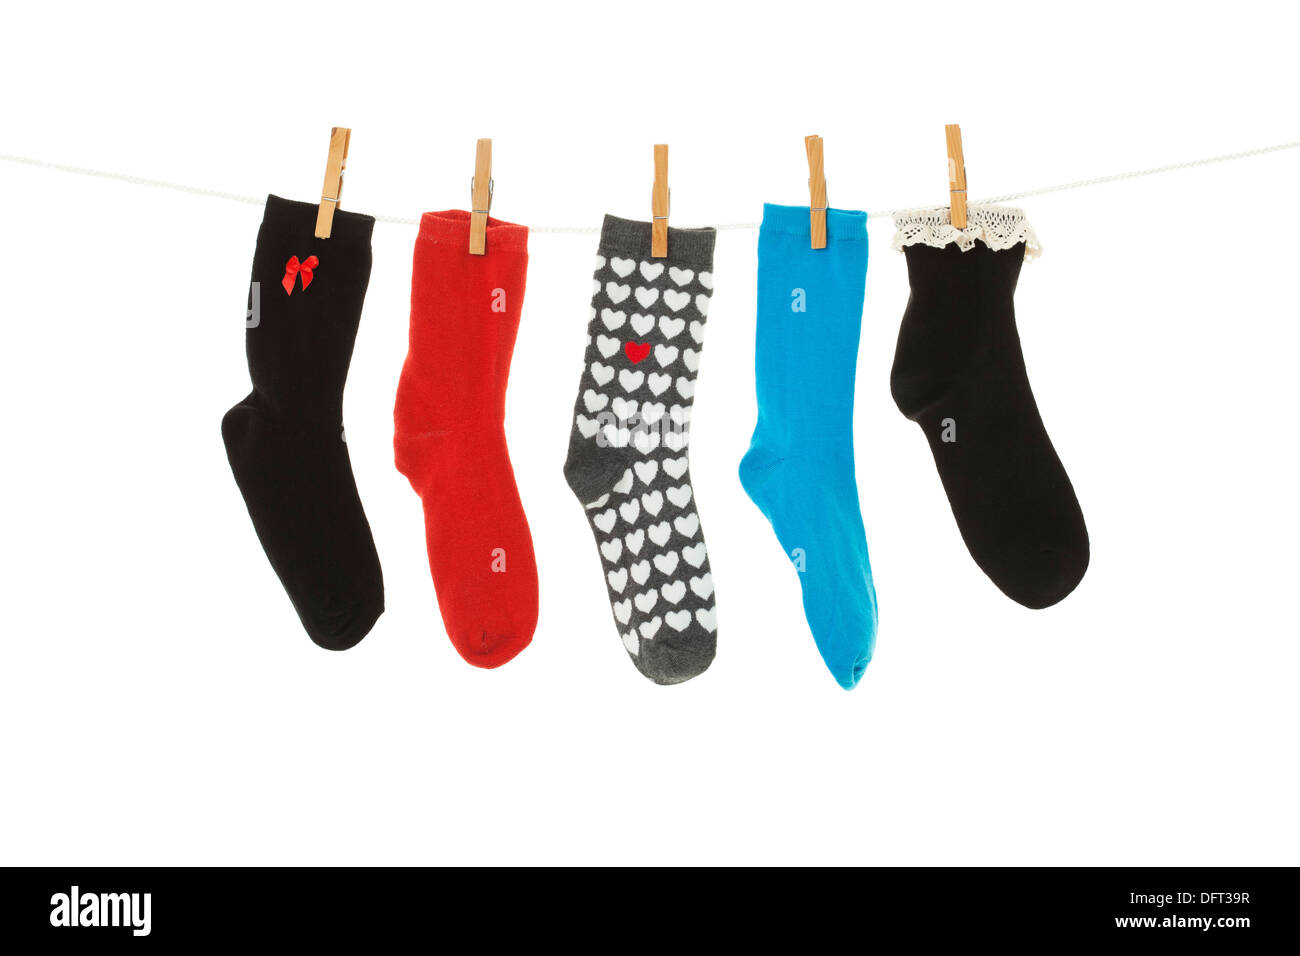 Odd Socks High Resolution Stock Photography and Images - Alamy